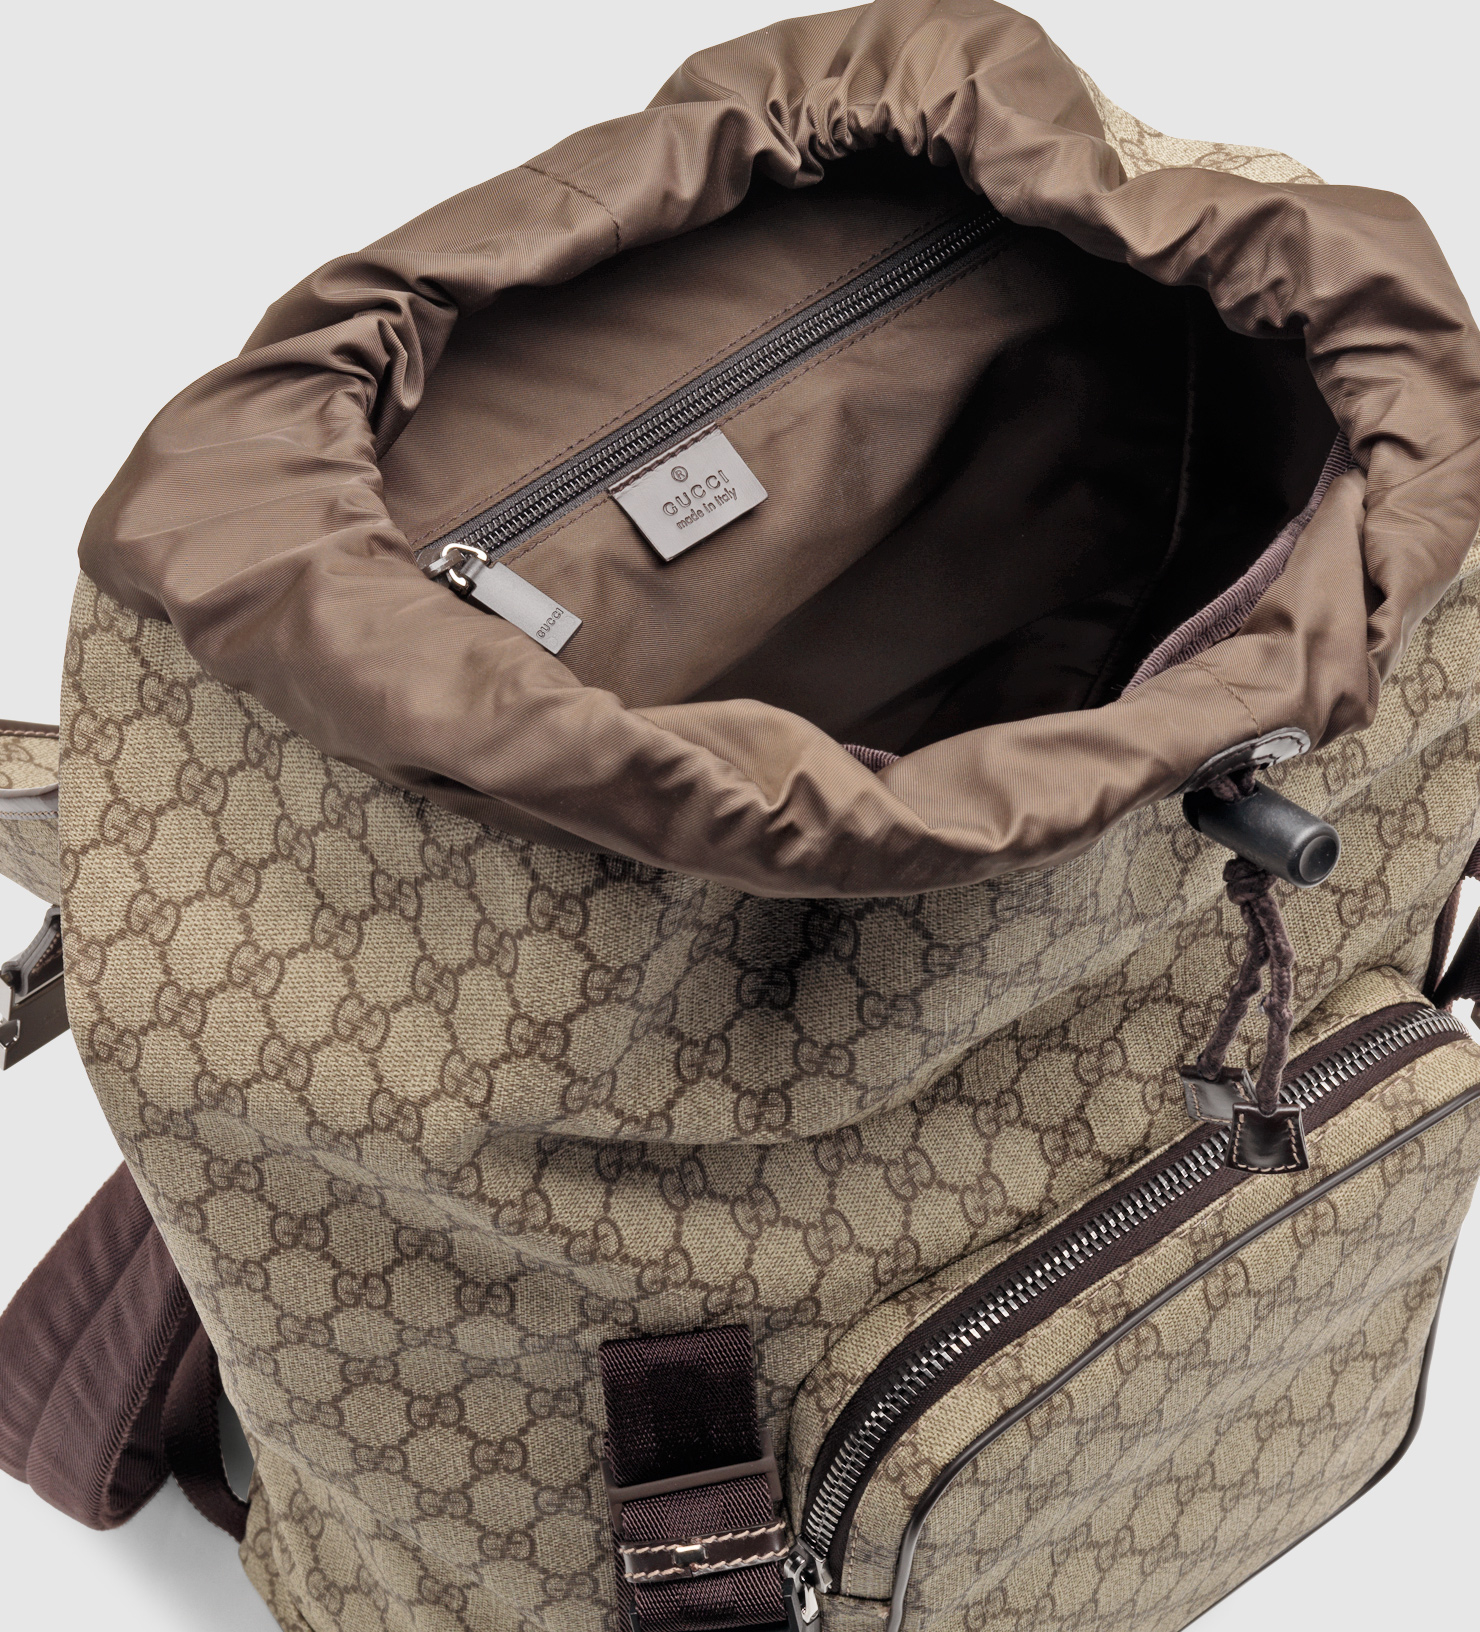 Lyst - Gucci Gg Supreme Canvas Interlocking G Backpack in Natural for Men